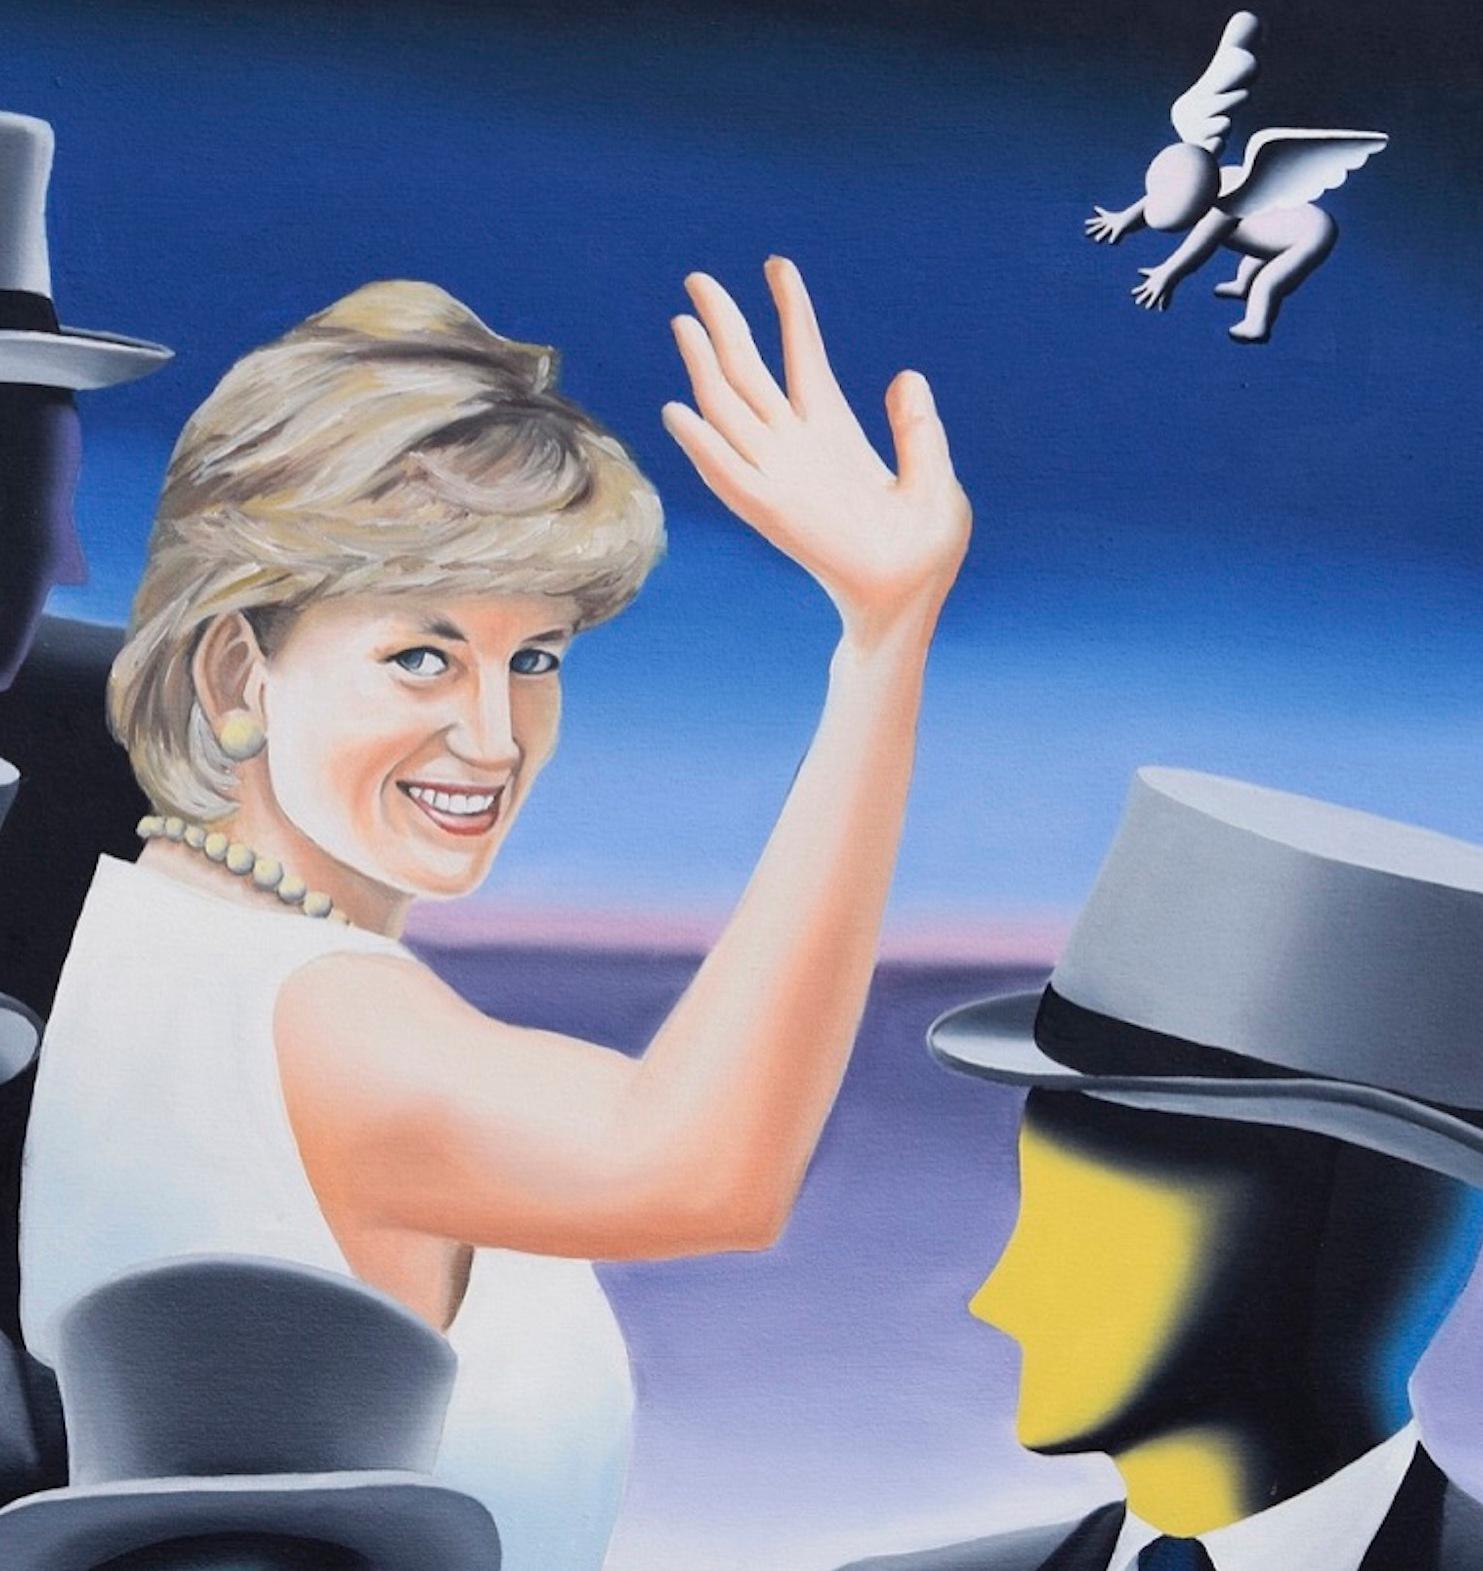 Fare Thee Well And If Forever - Oil on Canvas by M. Kostabi - 1997 - Painting by Mark Kostabi